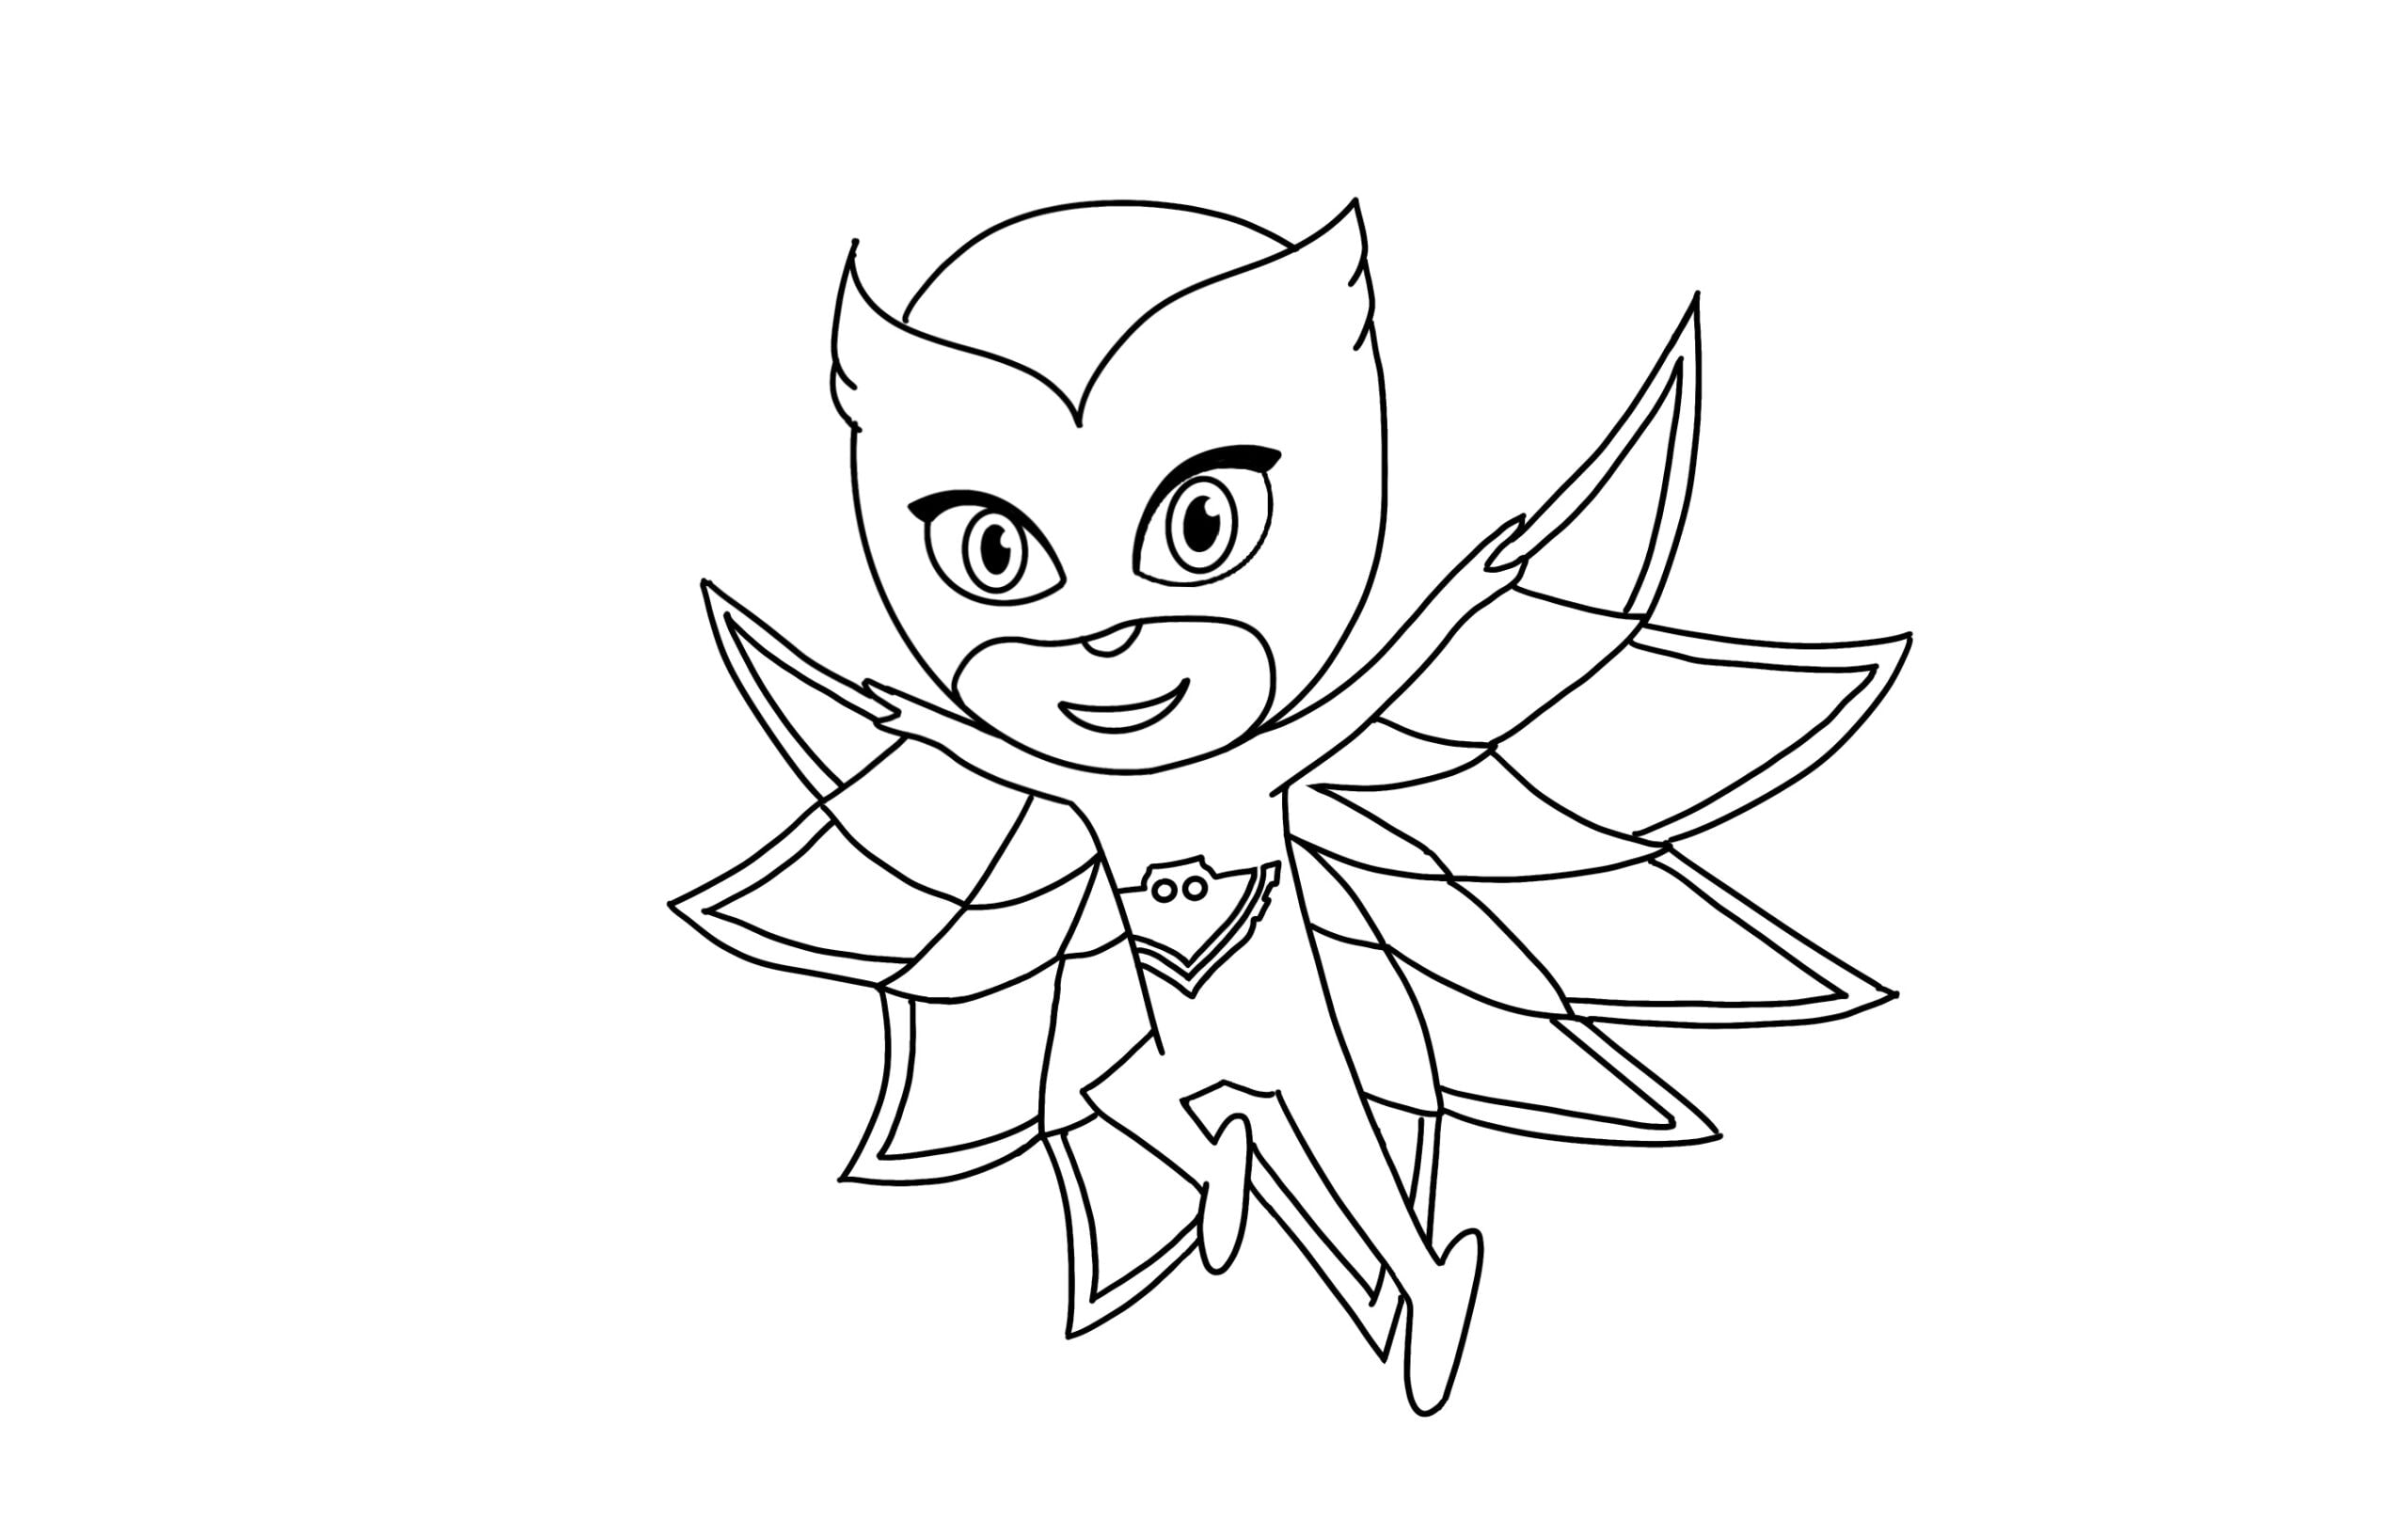 Pj masks coloring pages and colored paper